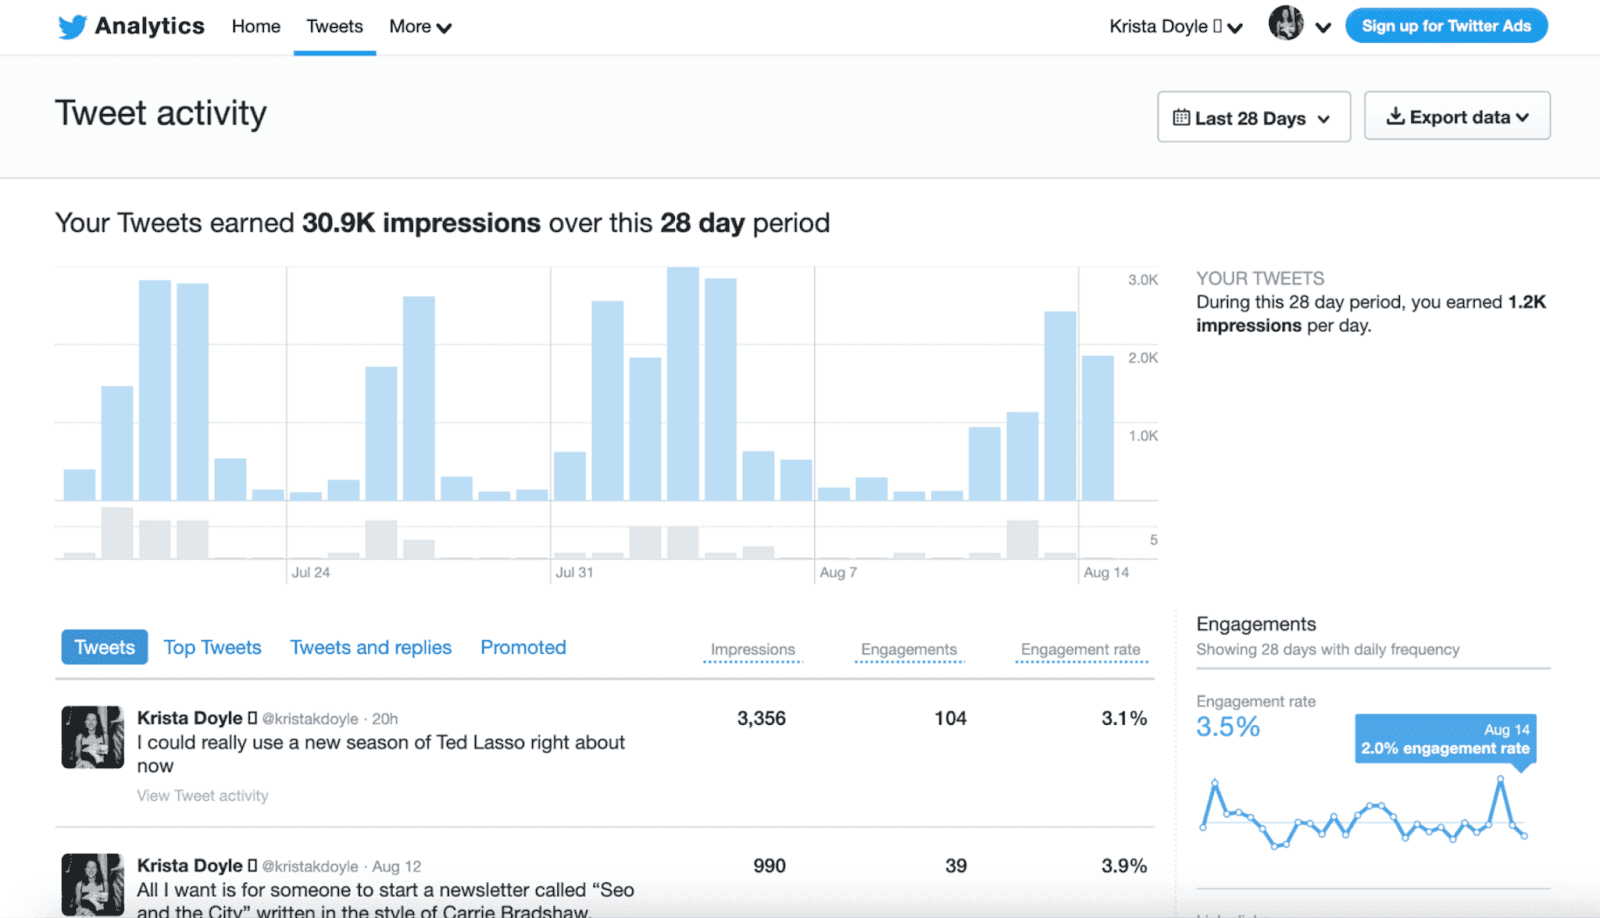 Example of Tweet analytics at use with bar graph showing impressions